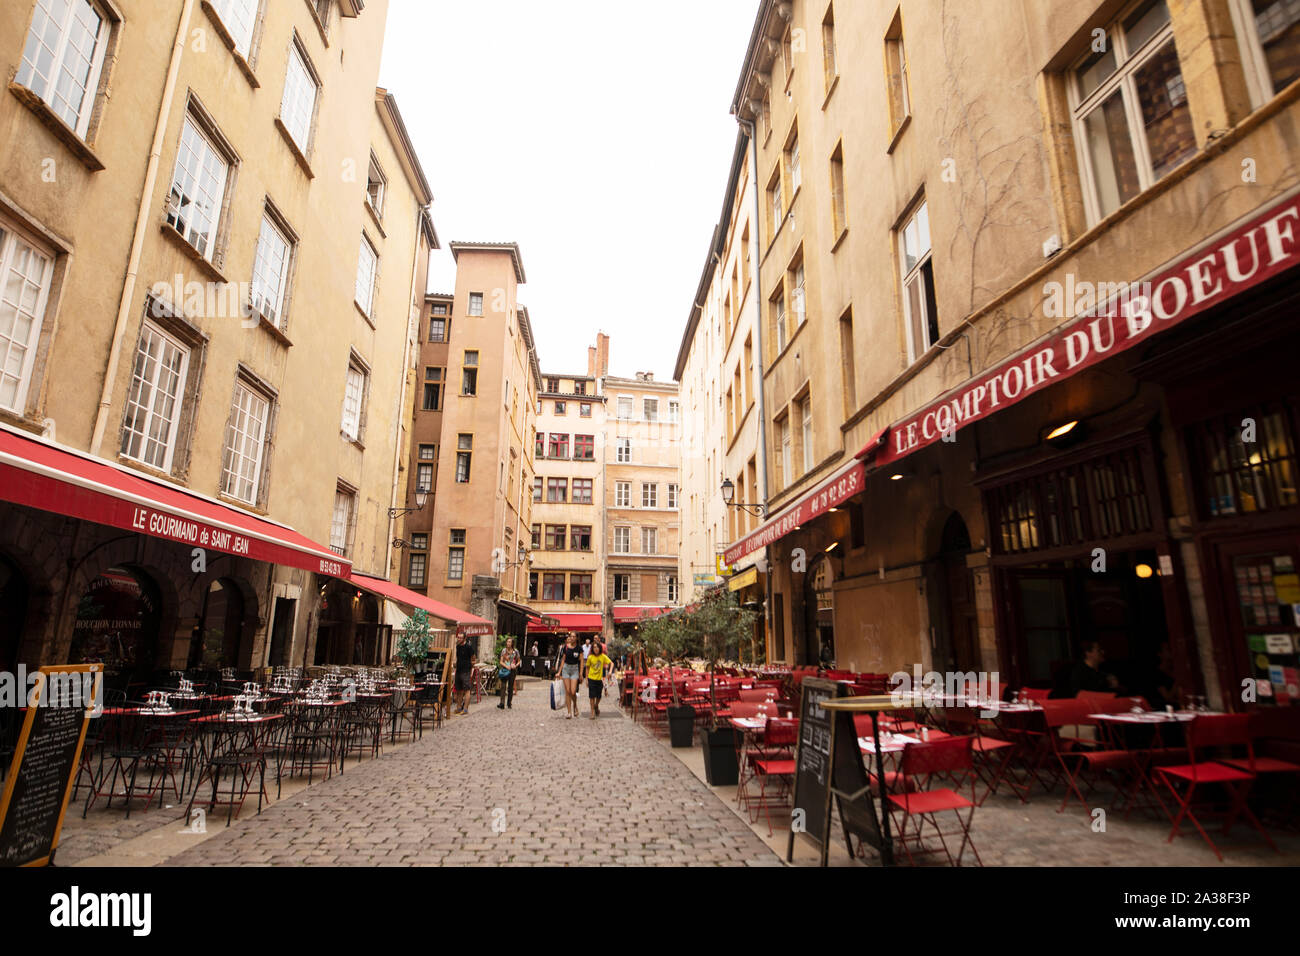 French restaurants line the Place Neuve Saint-Jean in the old quarter of Lyon, France. Stock Photo